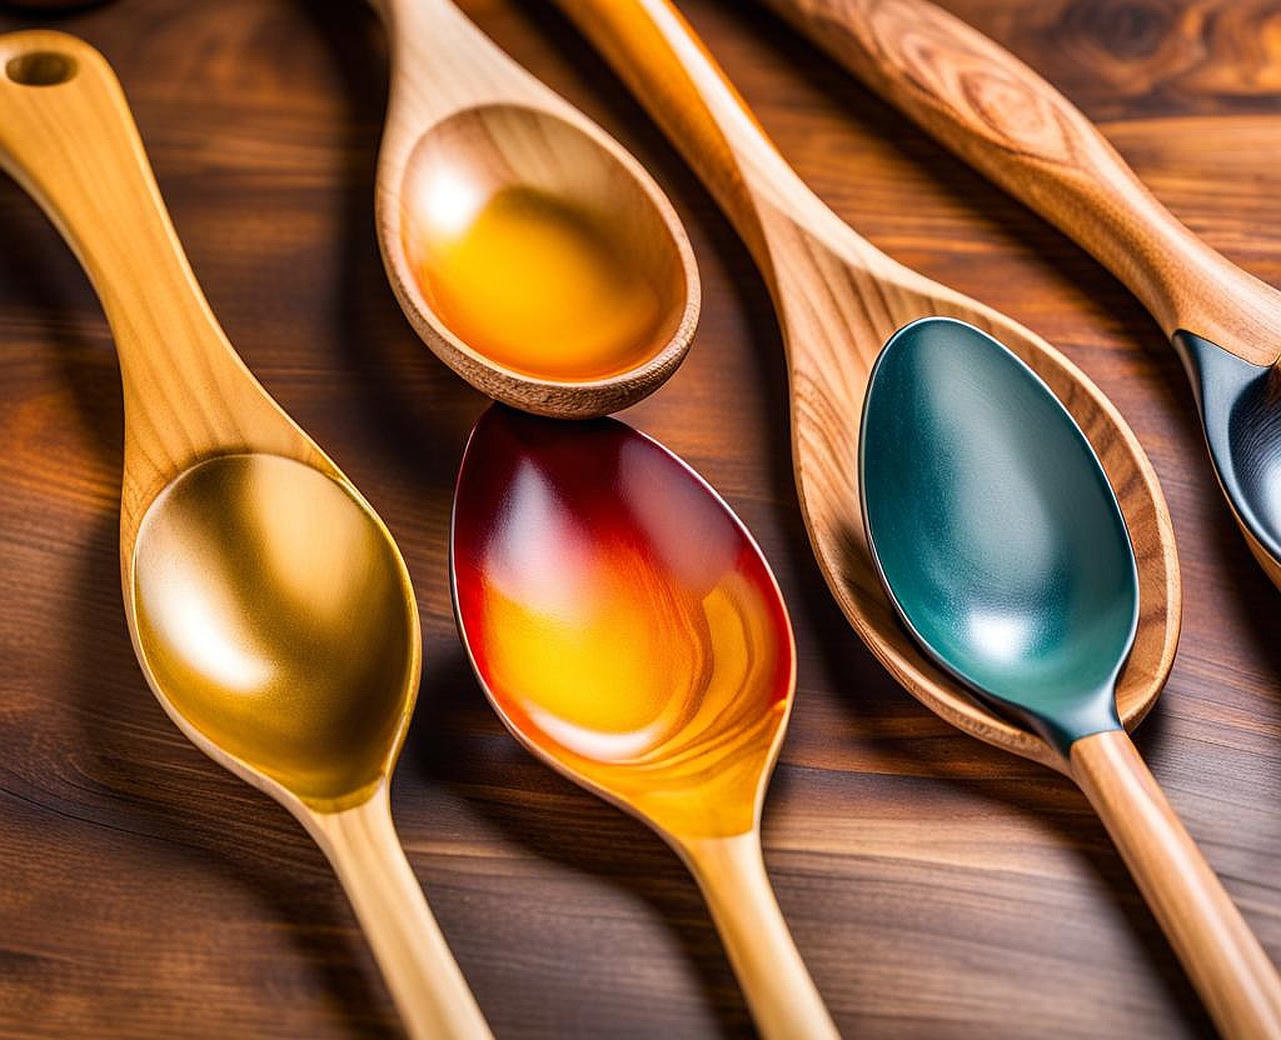 The Essential Guide to Choosing the Right Wood Spoons for Crafts